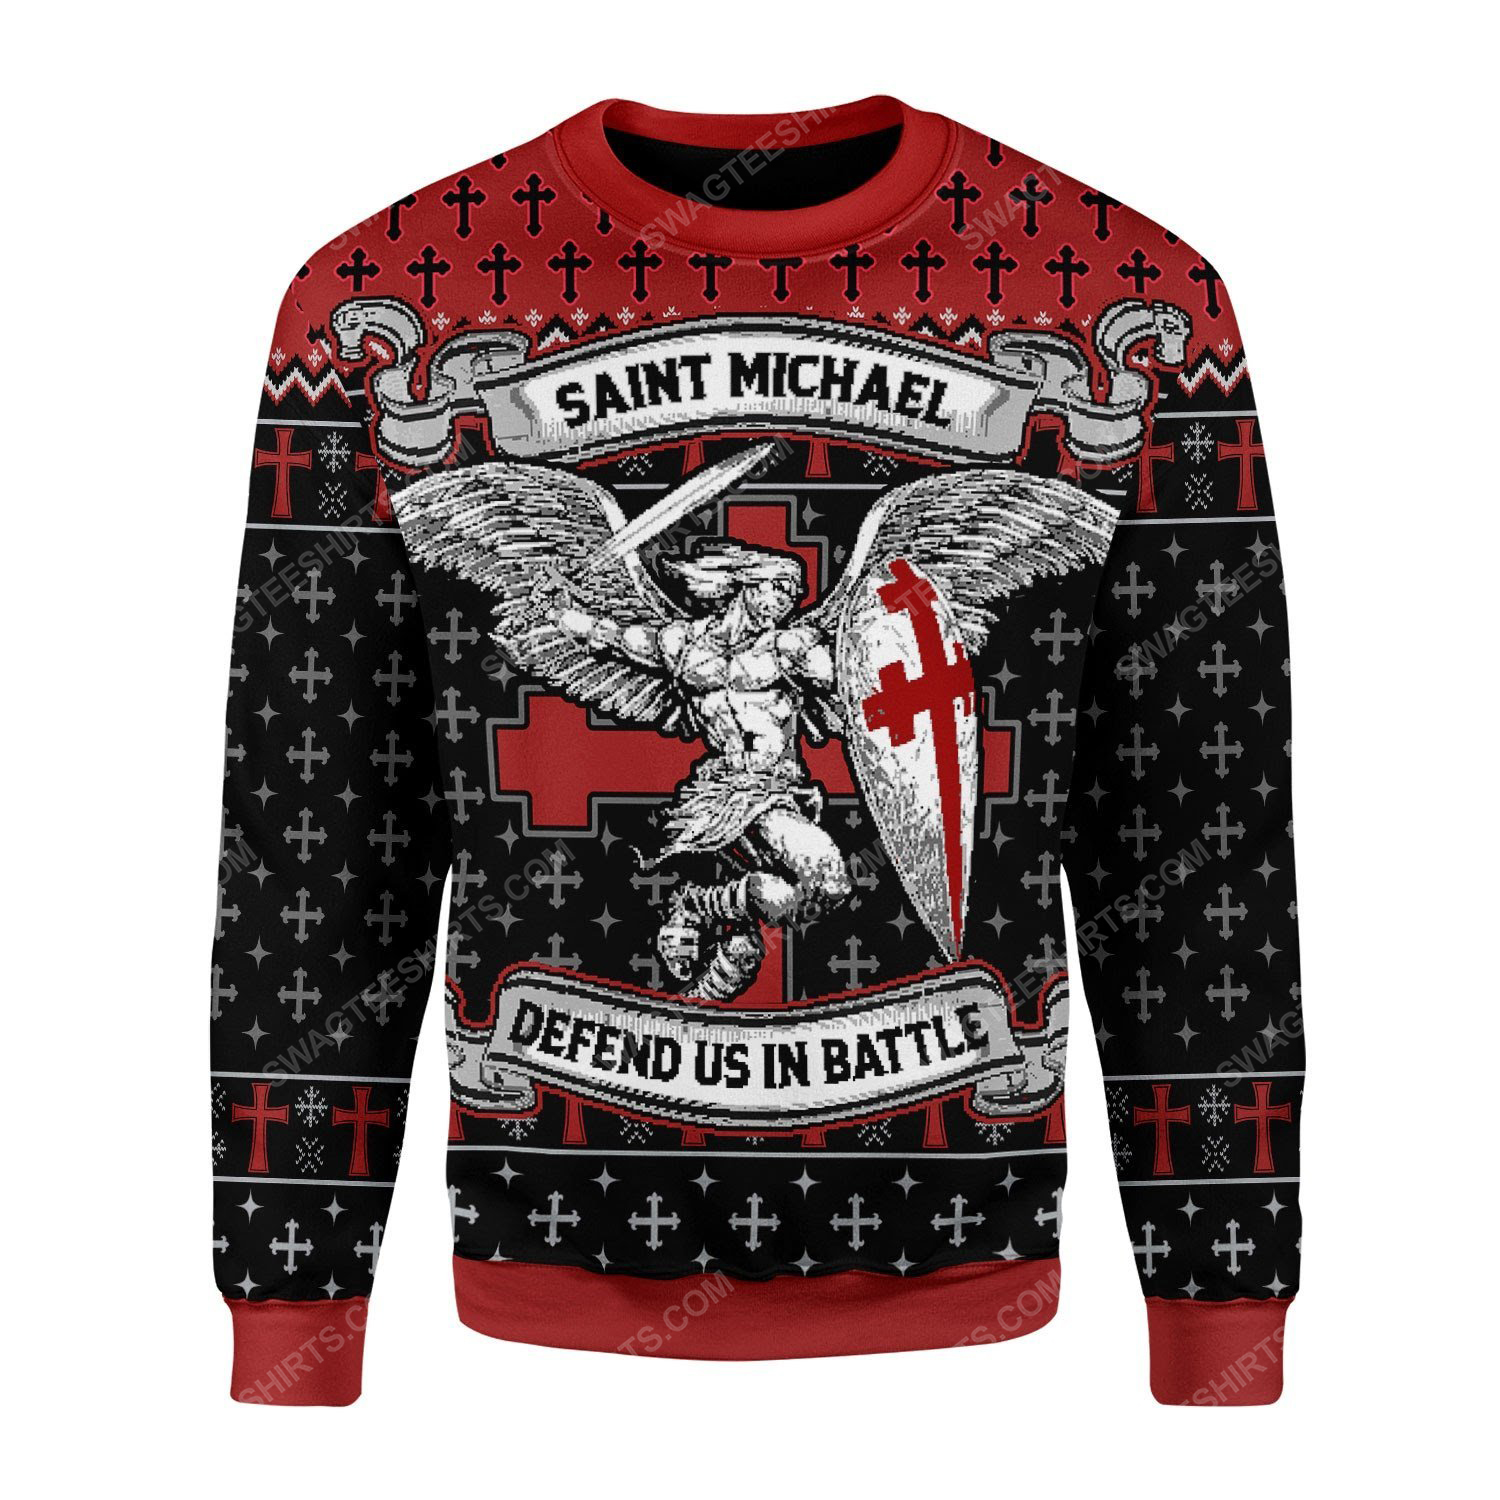 Catholic defend us in battle saint michae ugly christmas sweater